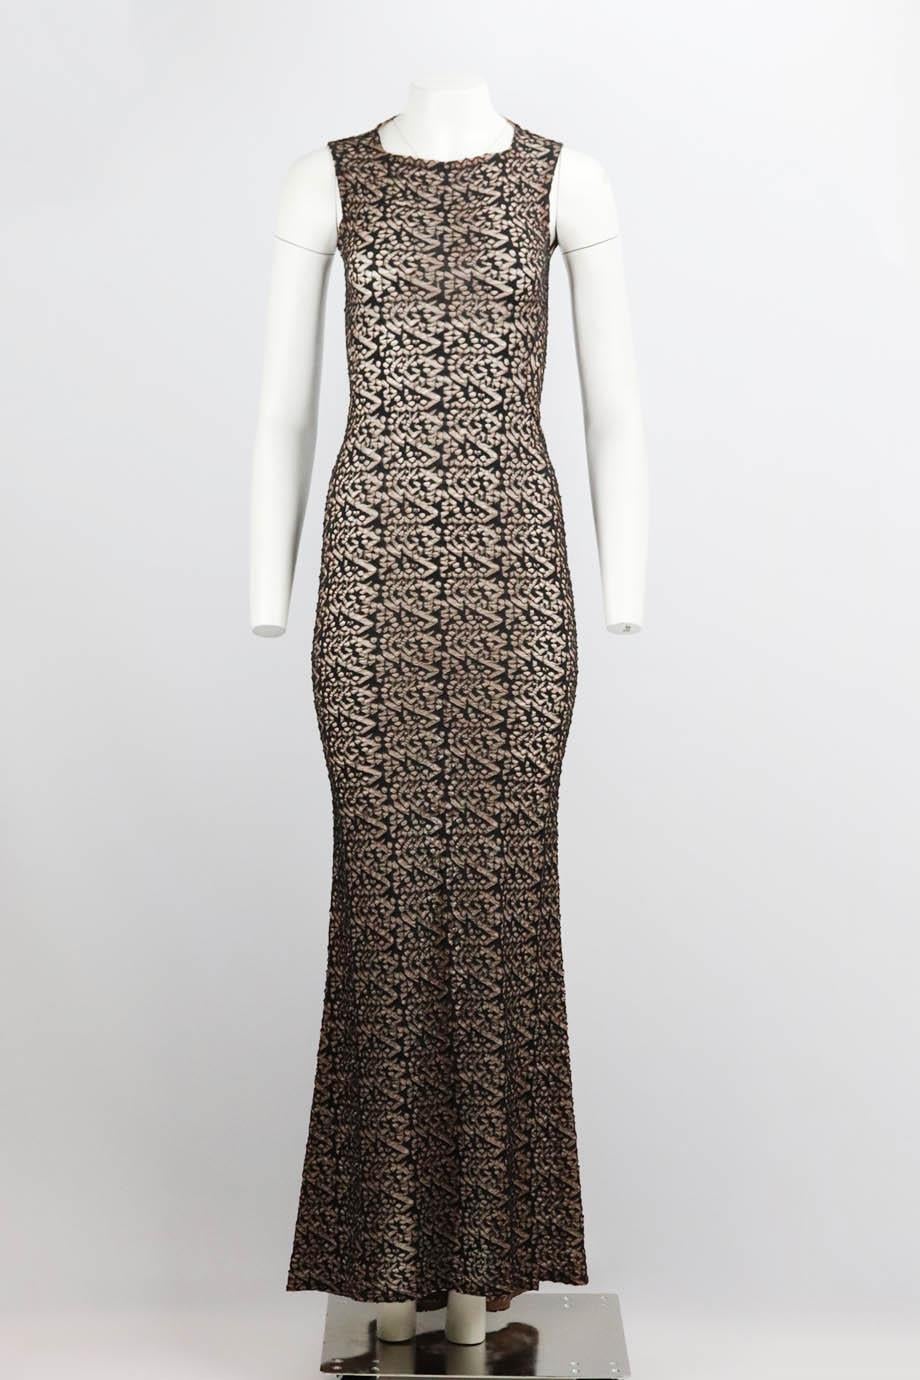 Azzedine Alaïa macramé lace maxi dress. Black and nude. Sleeveless, crewneck. Zip fastening at back. 40% Viscose, 40% polyamide, 20% silk. Size: FR 38 (UK 10, US 6, IT 42). Bust: 28 in. Waist: 24 in. Hips: 32 in. Length: 63 in
